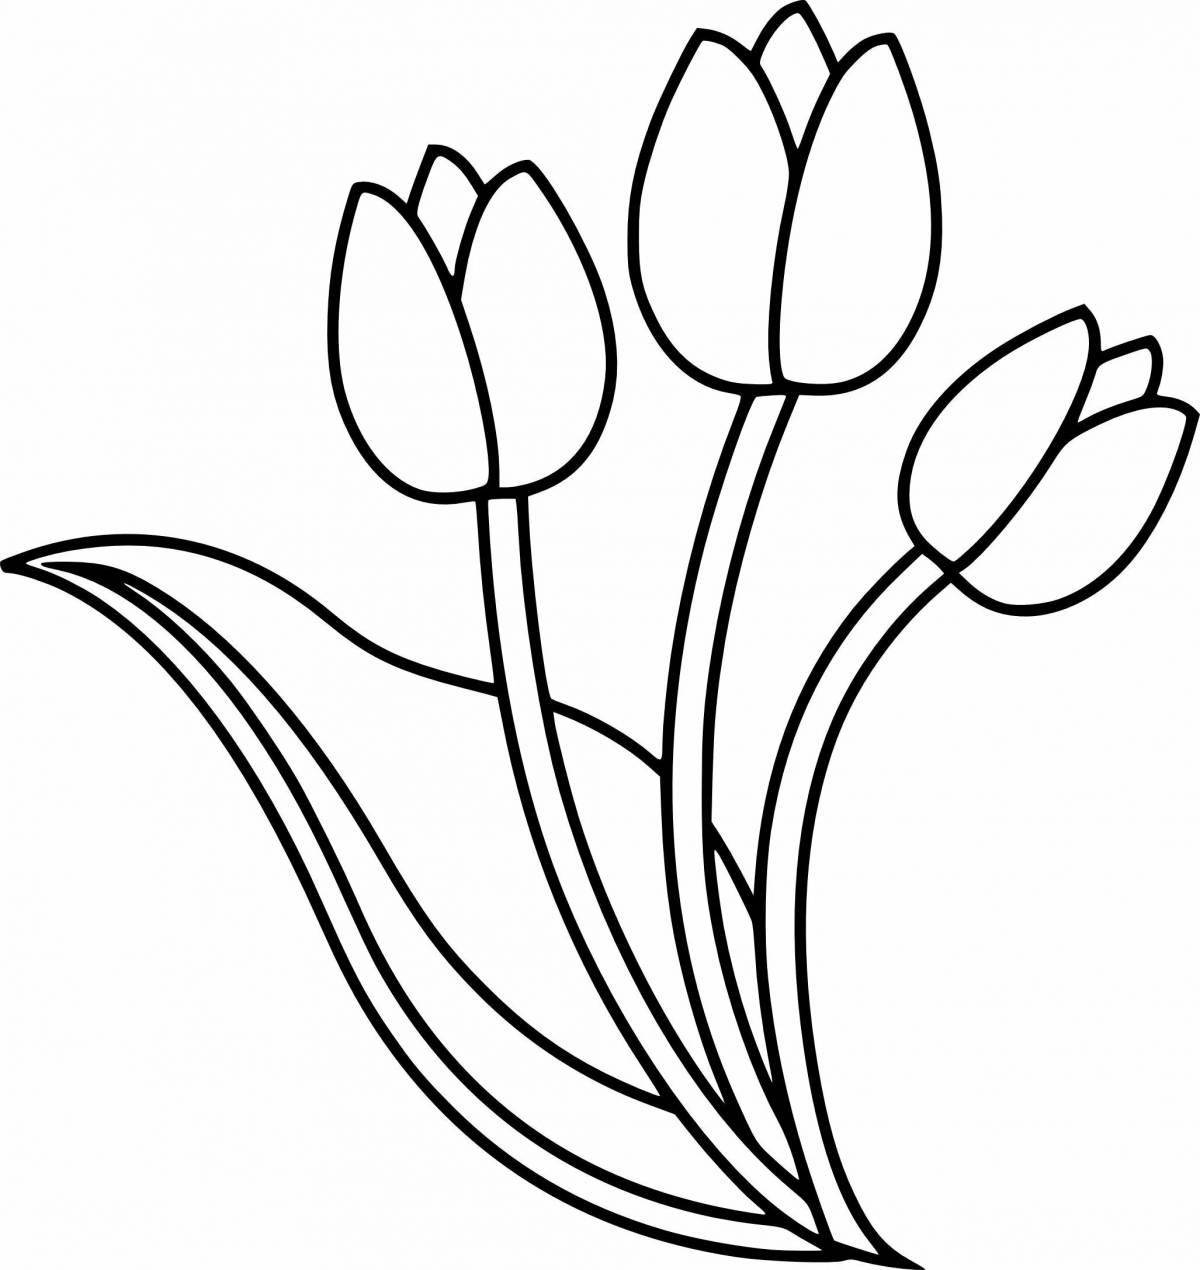 Glowing tulip coloring page